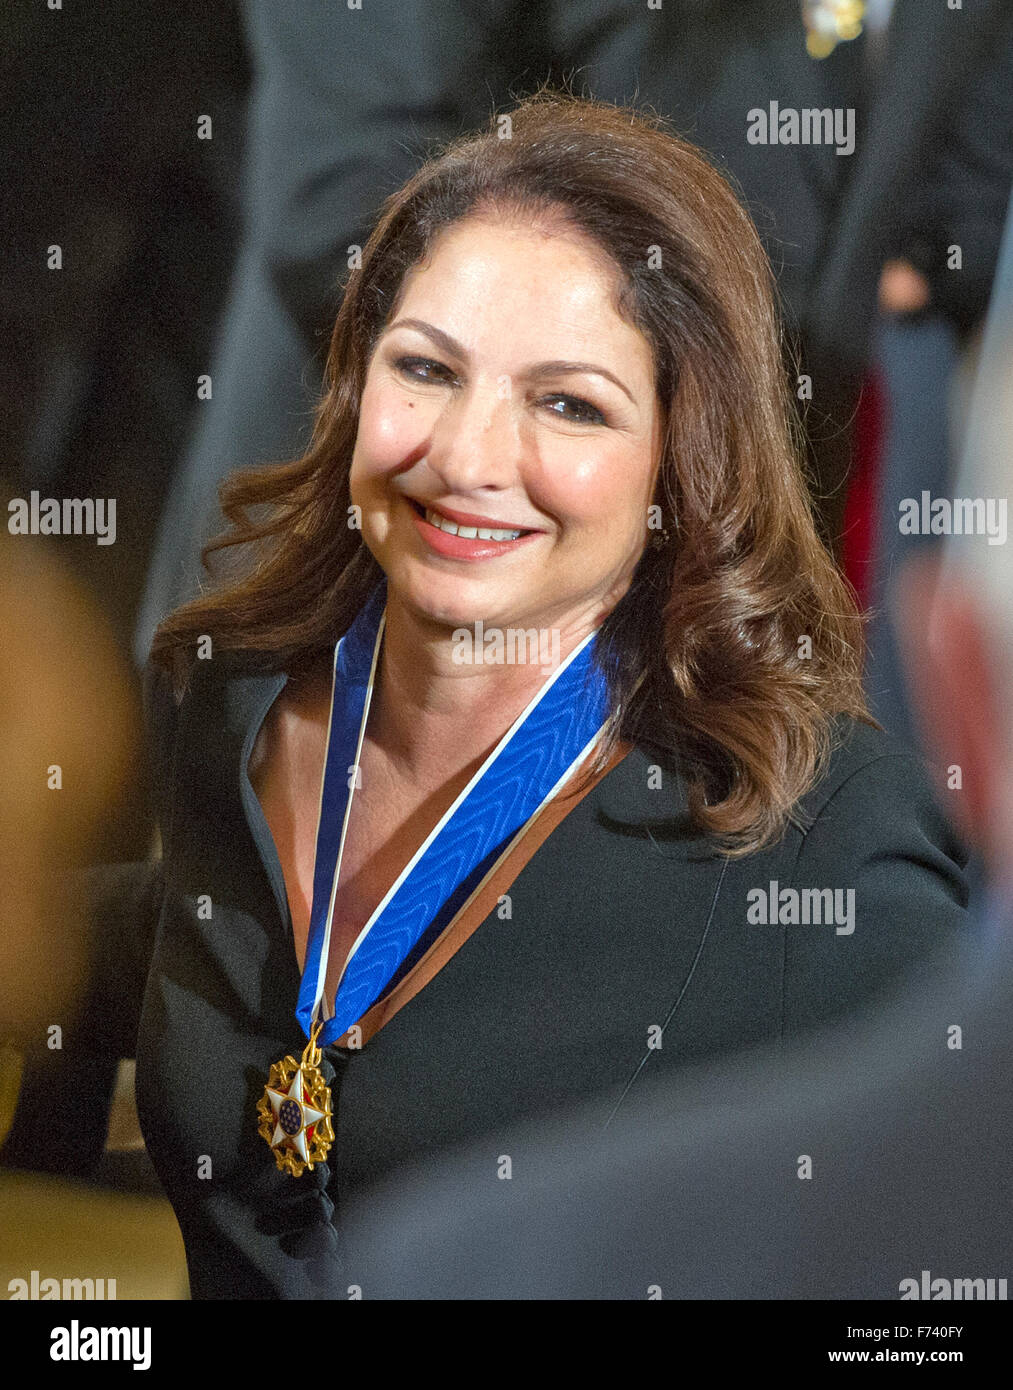 Presidential Medal of Freedom recipient Gloria Estefan wears her award as she departs following the ceremony in the East Room of the White House in Washington, DC on Tuesday, November 24, 2015. The Medal is the highest US civilian honor, presented to individuals who have made especially meritorious contributions to the security or national interests of the US, to world peace, or to cultural or significant public or private endeavors. Photo: Ron Sachs/CNP/dpa - NO WIRE SERVICE - Stock Photo